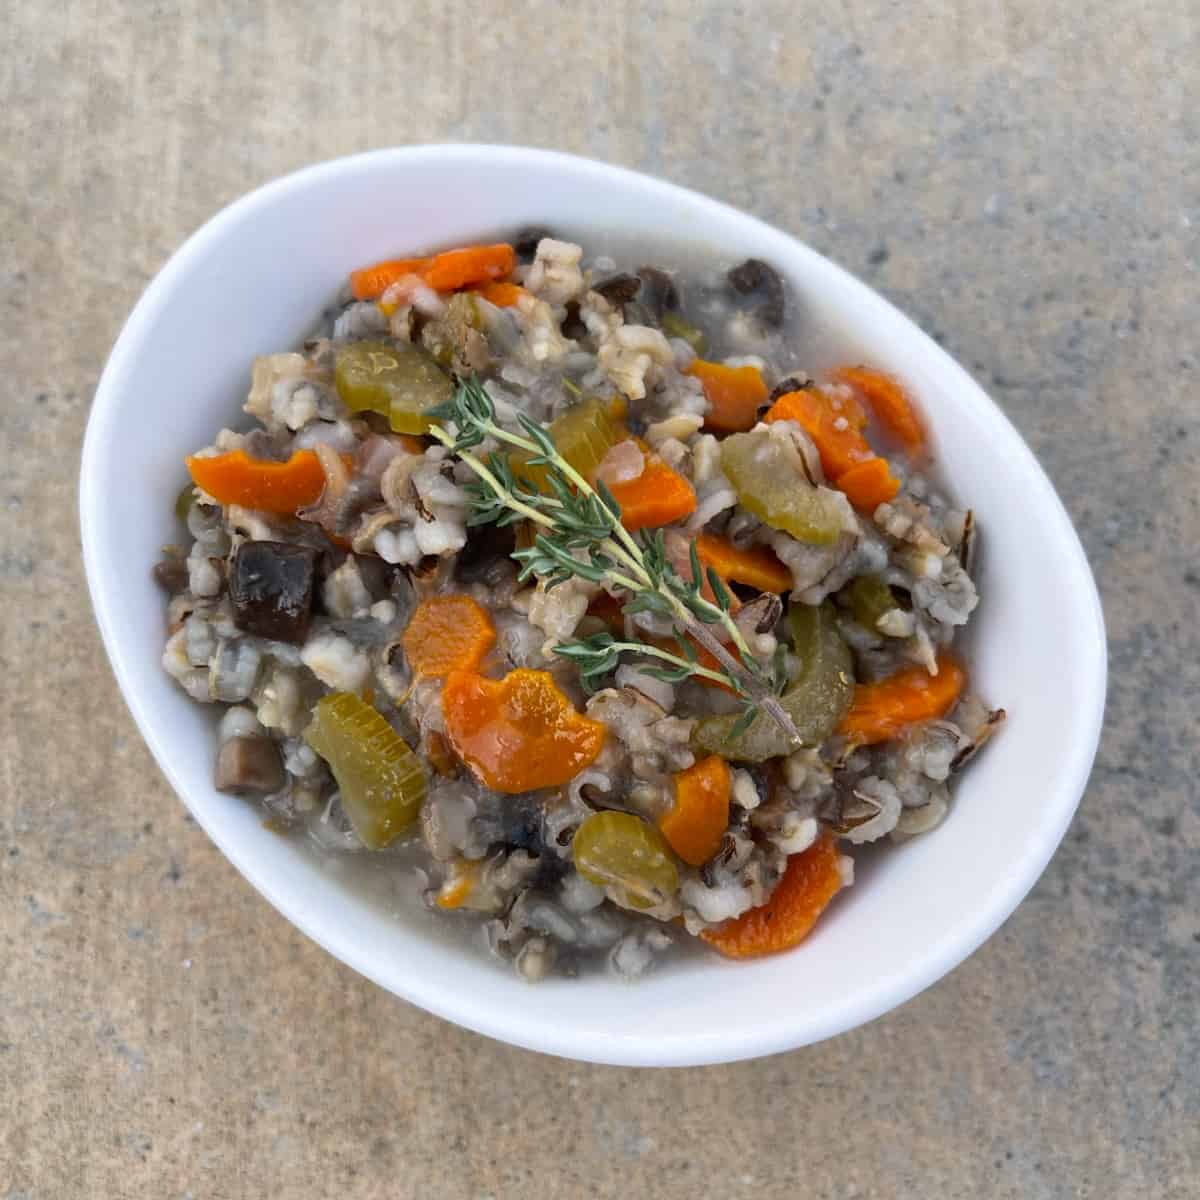 Instant Pot Wild Rice and Mushroom Vegetable Stew garnished with fresh thyme in small white bowl.